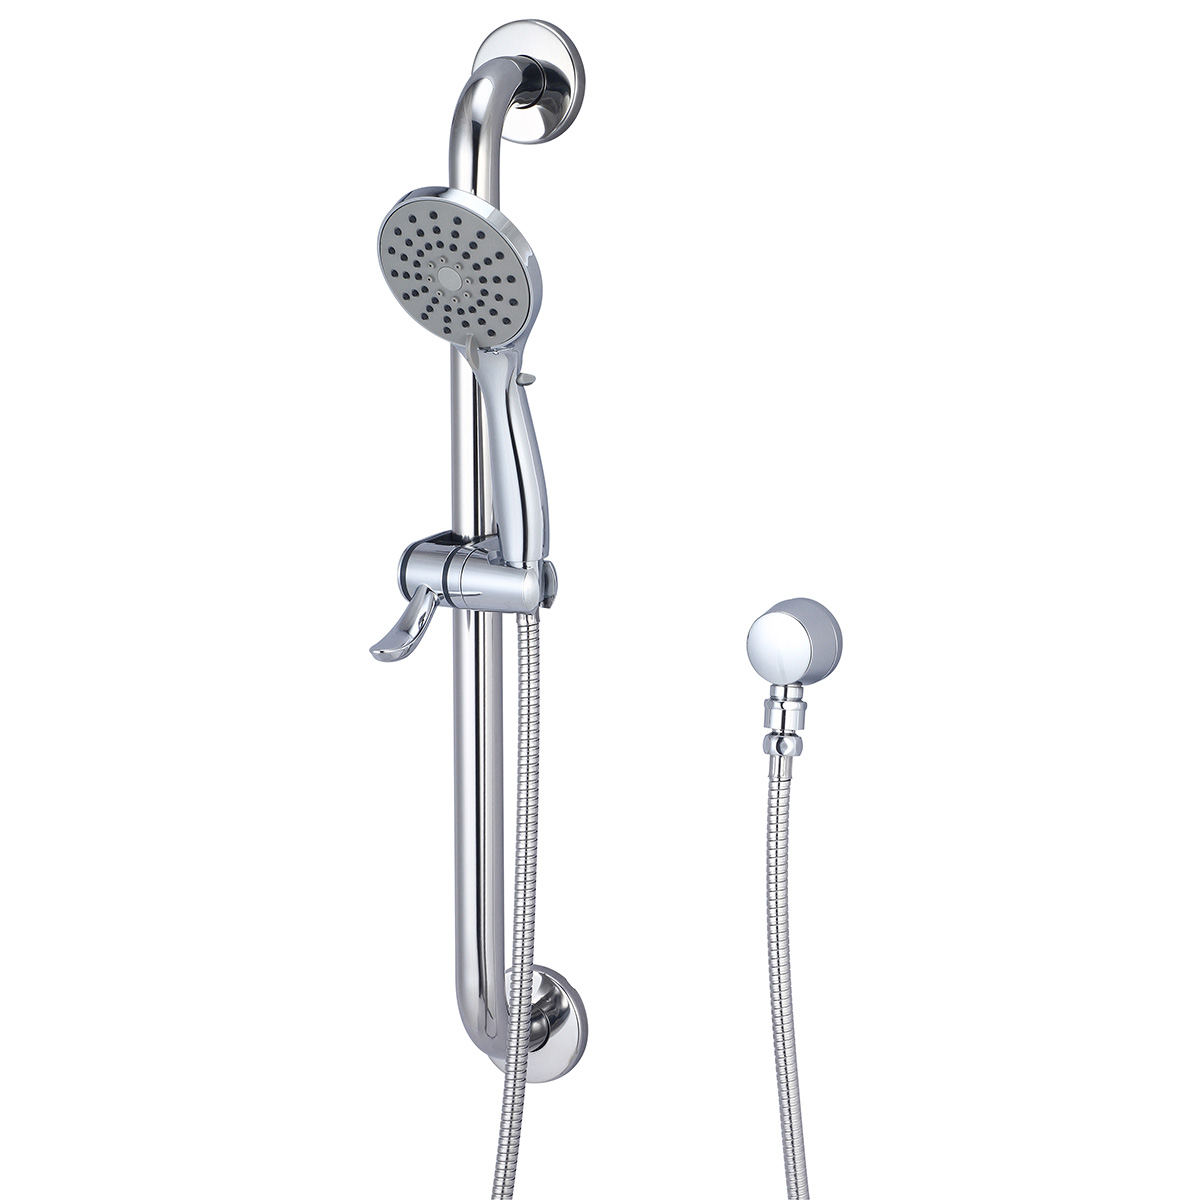 Picture of Accent P-4440 Handheld Shower Set - Chrome